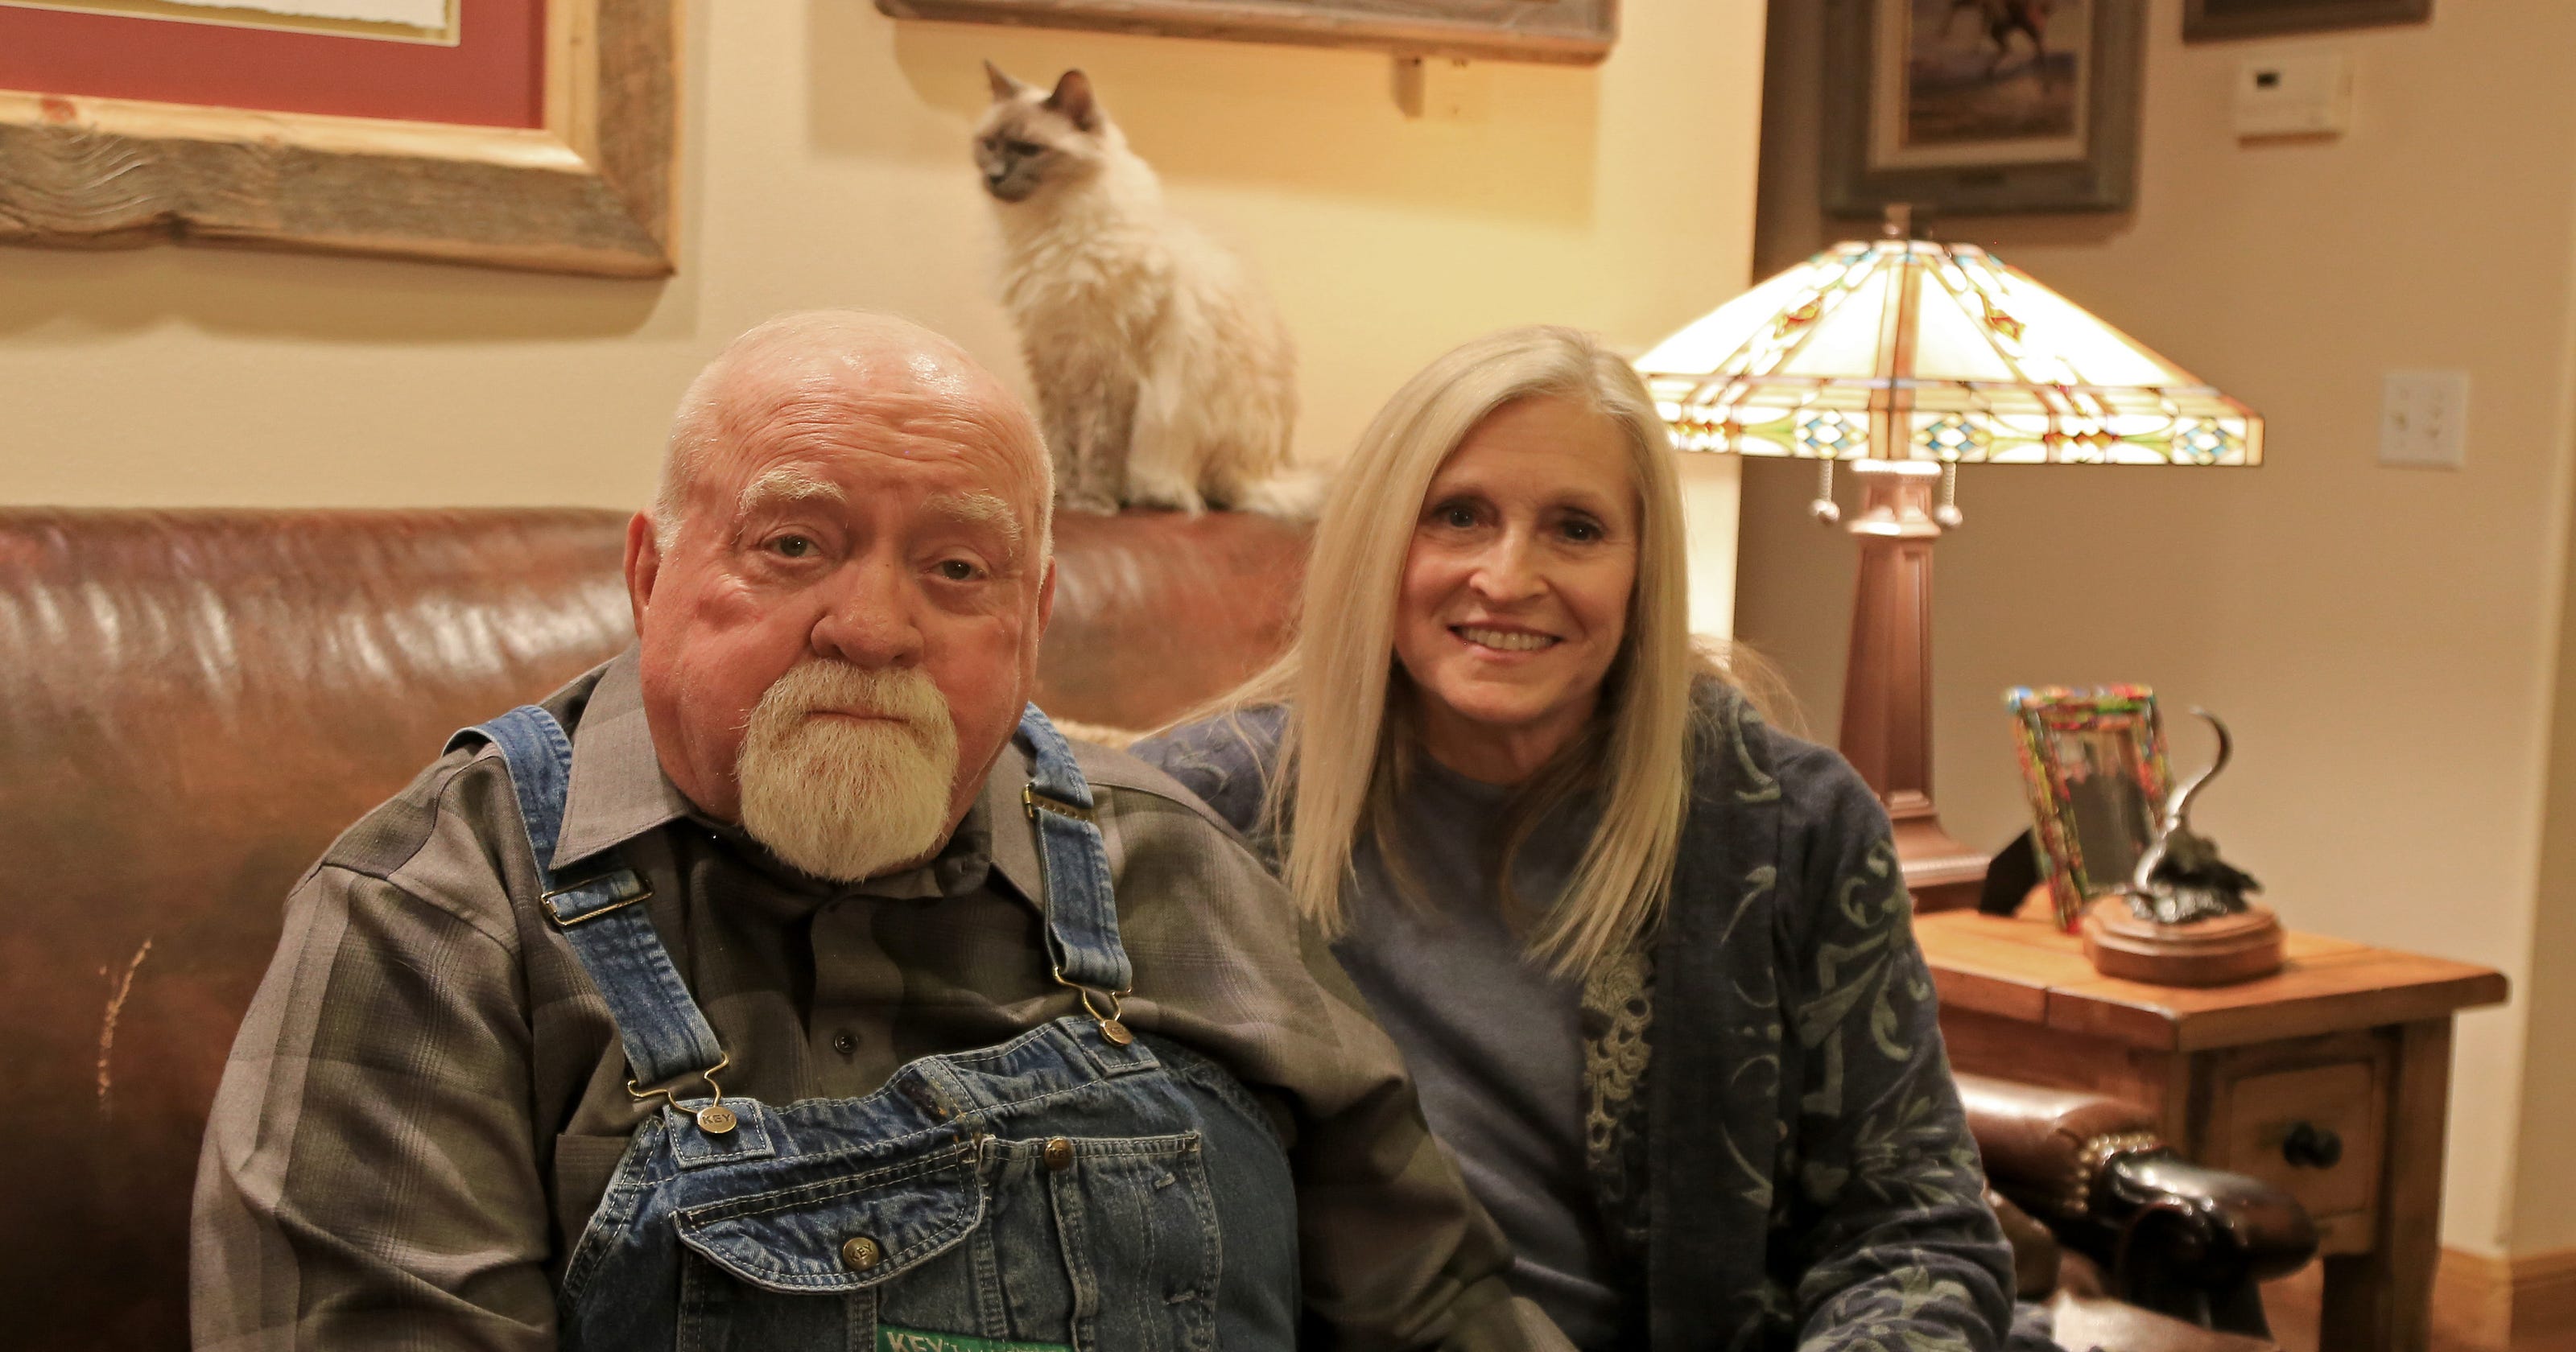 Wilford Brimley concert series coming to the Electric Theater